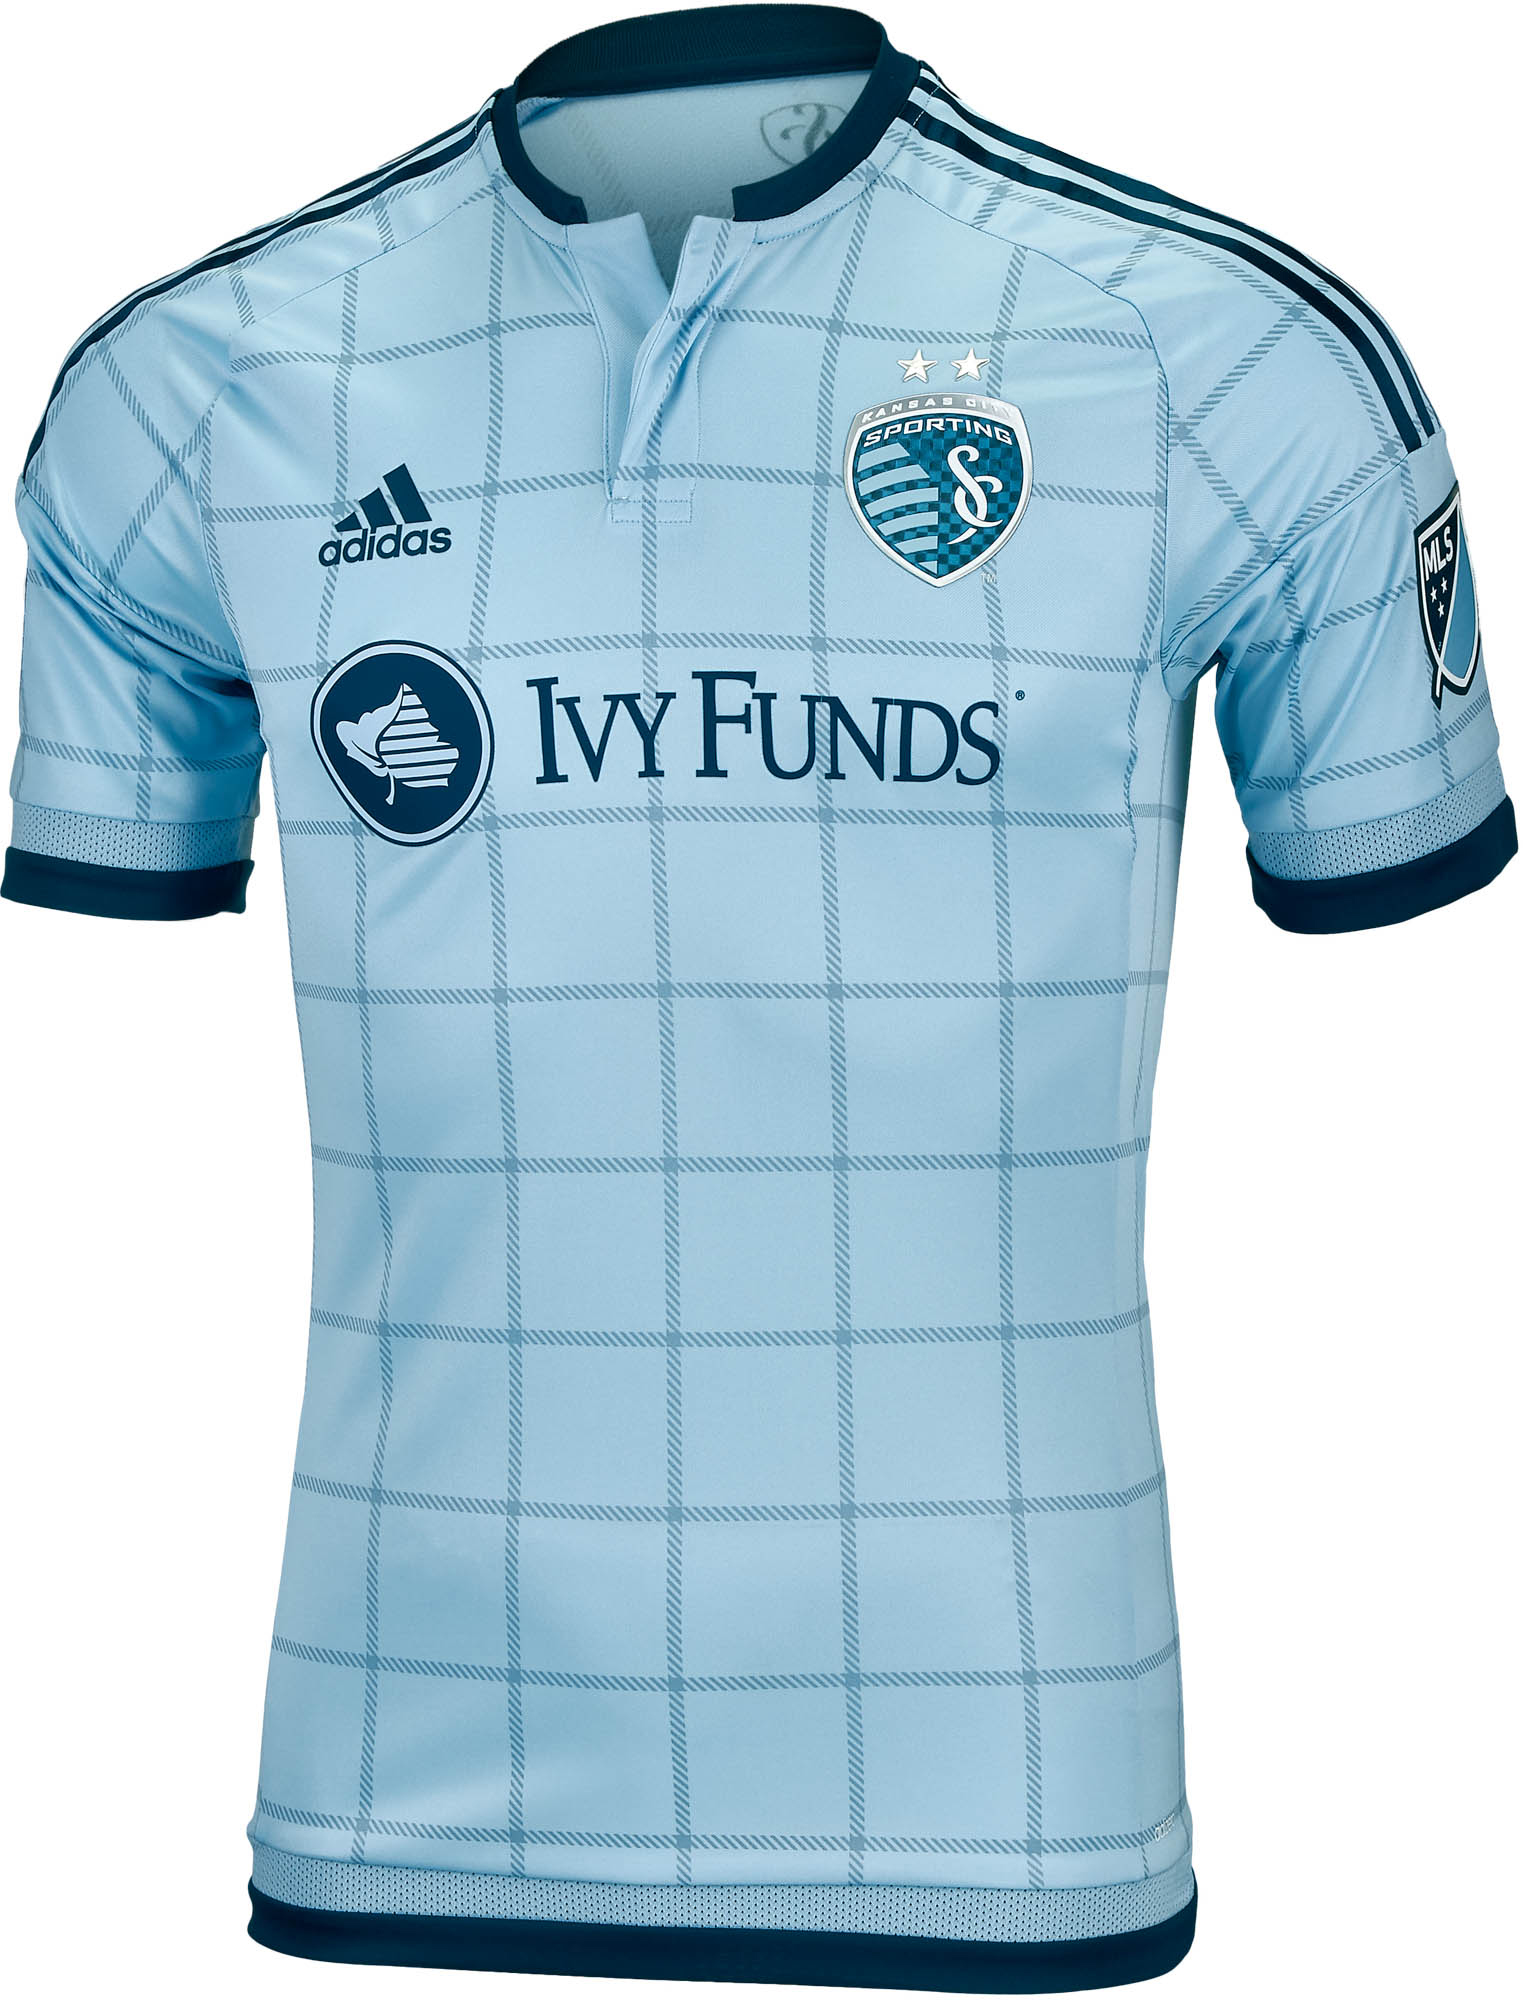 sporting kc youth jersey